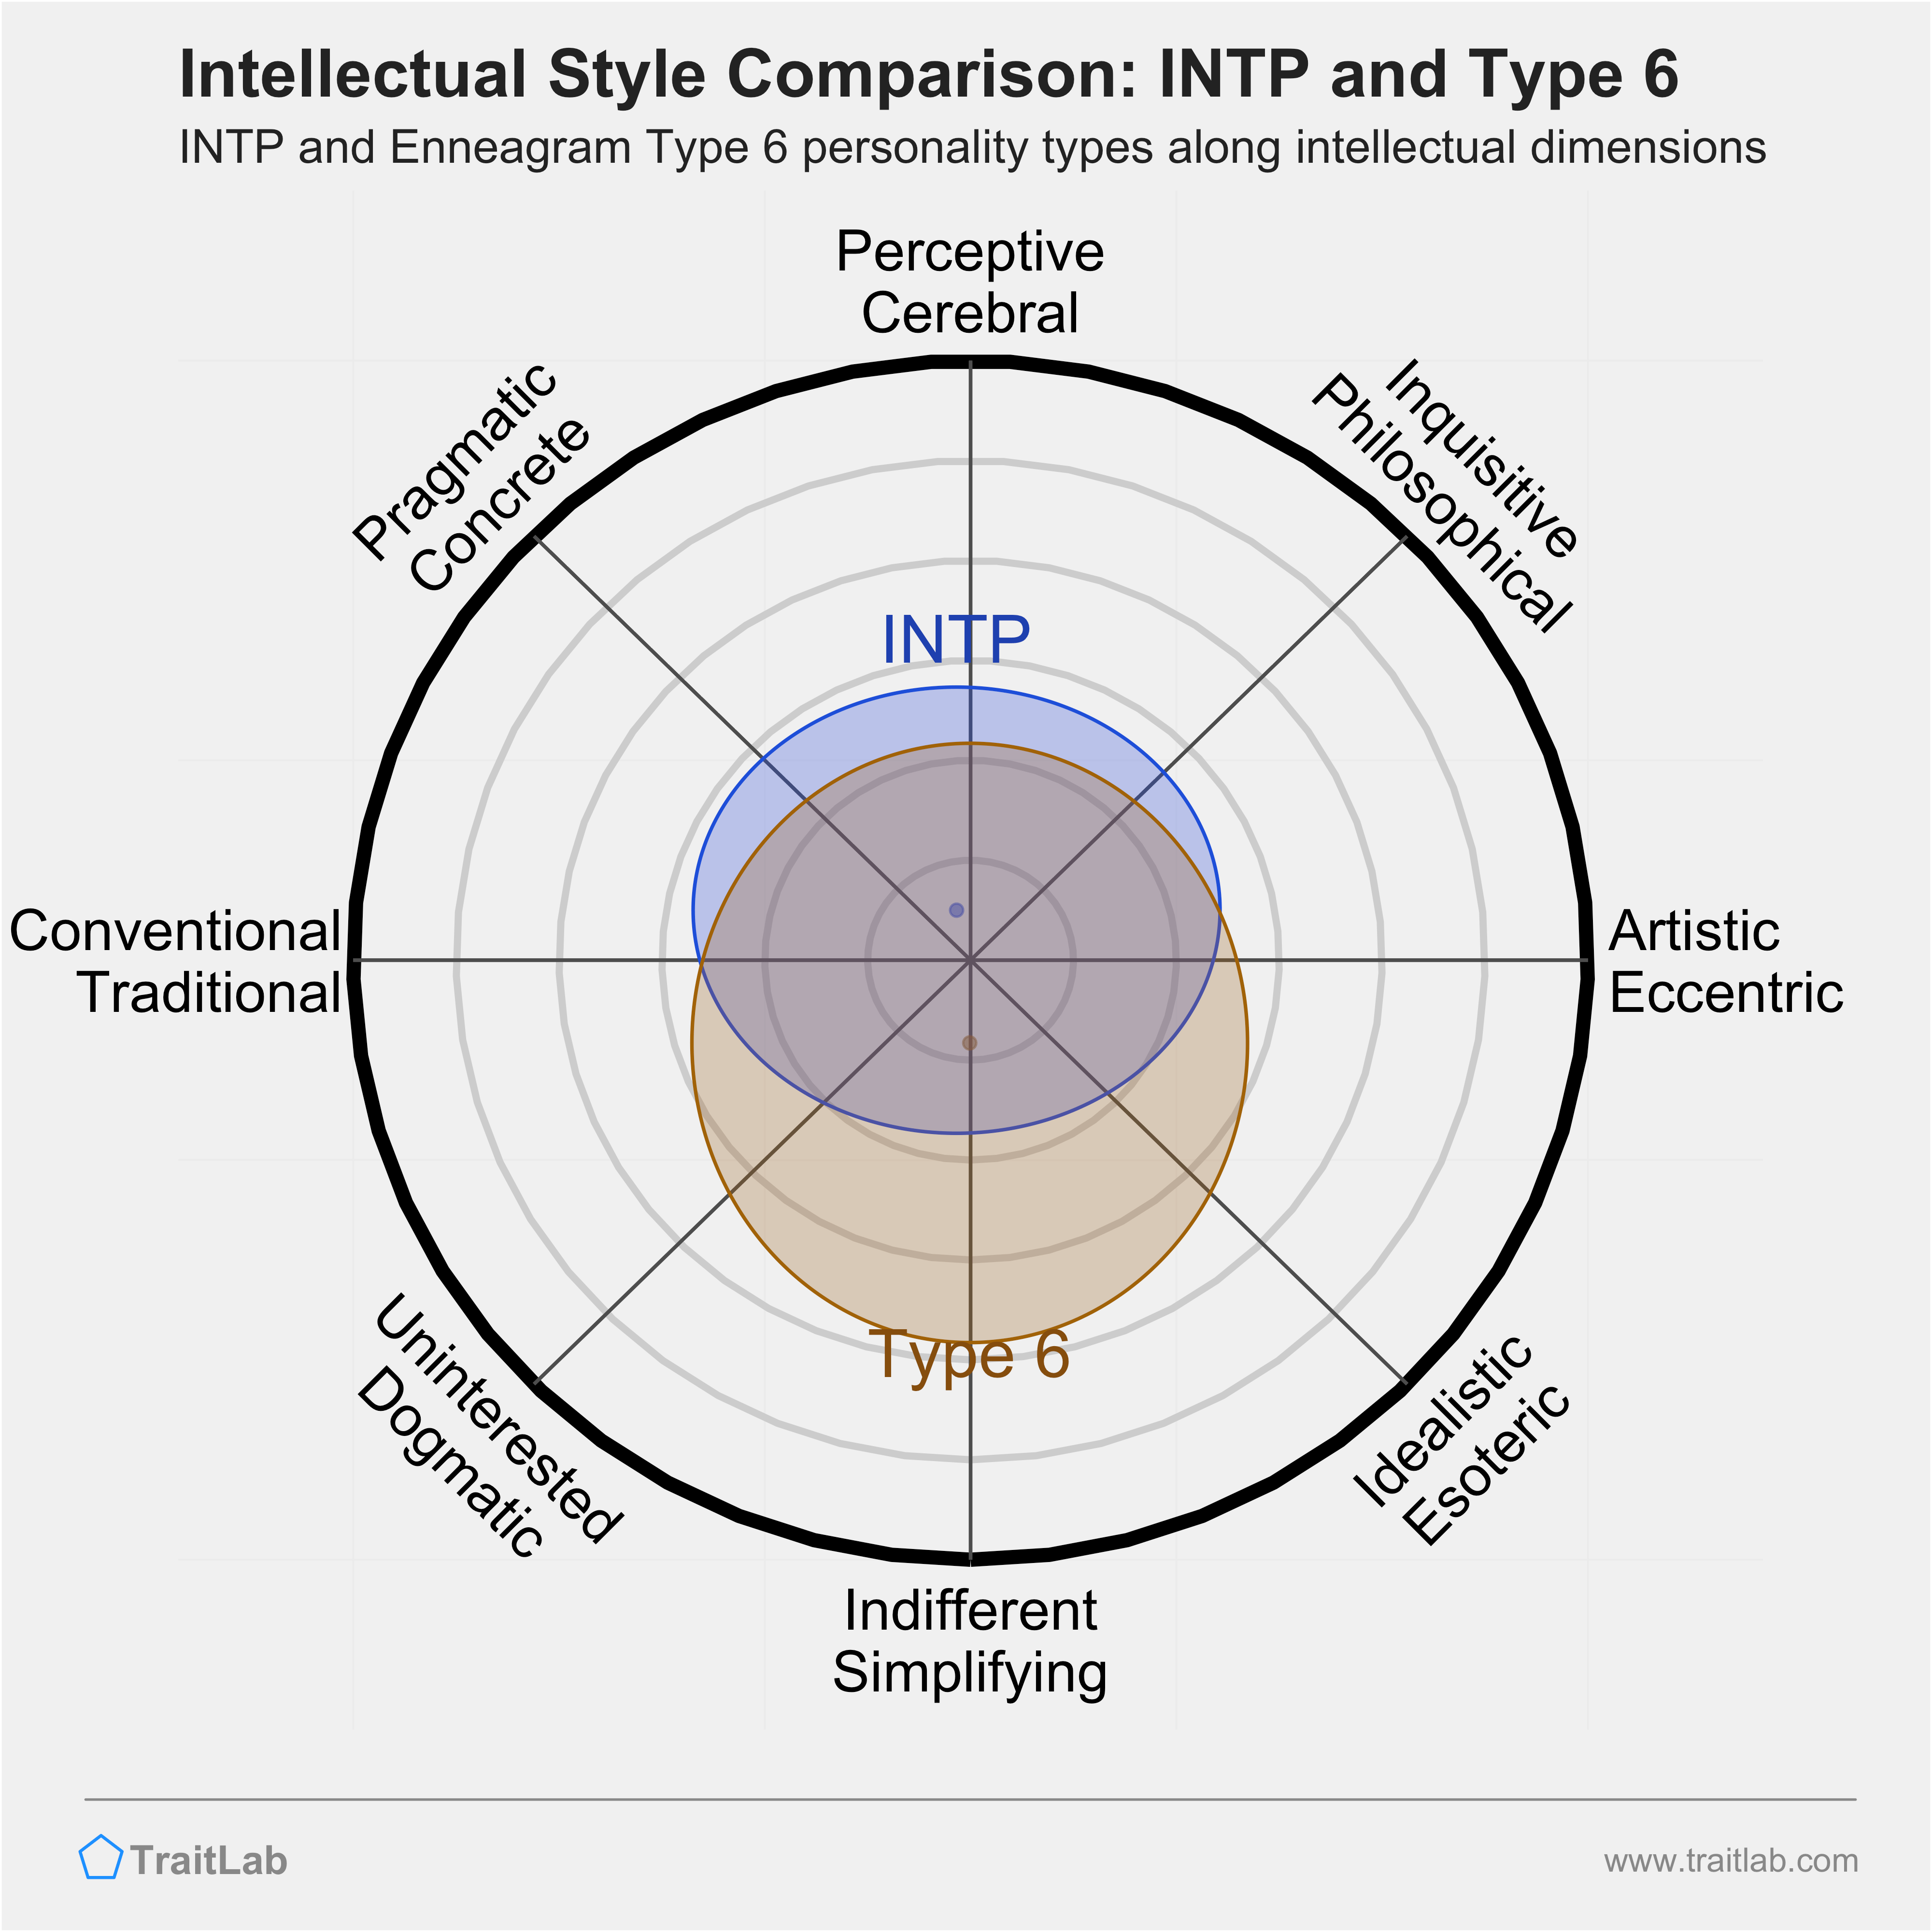 INTP and Type 6 comparison across intellectual dimensions